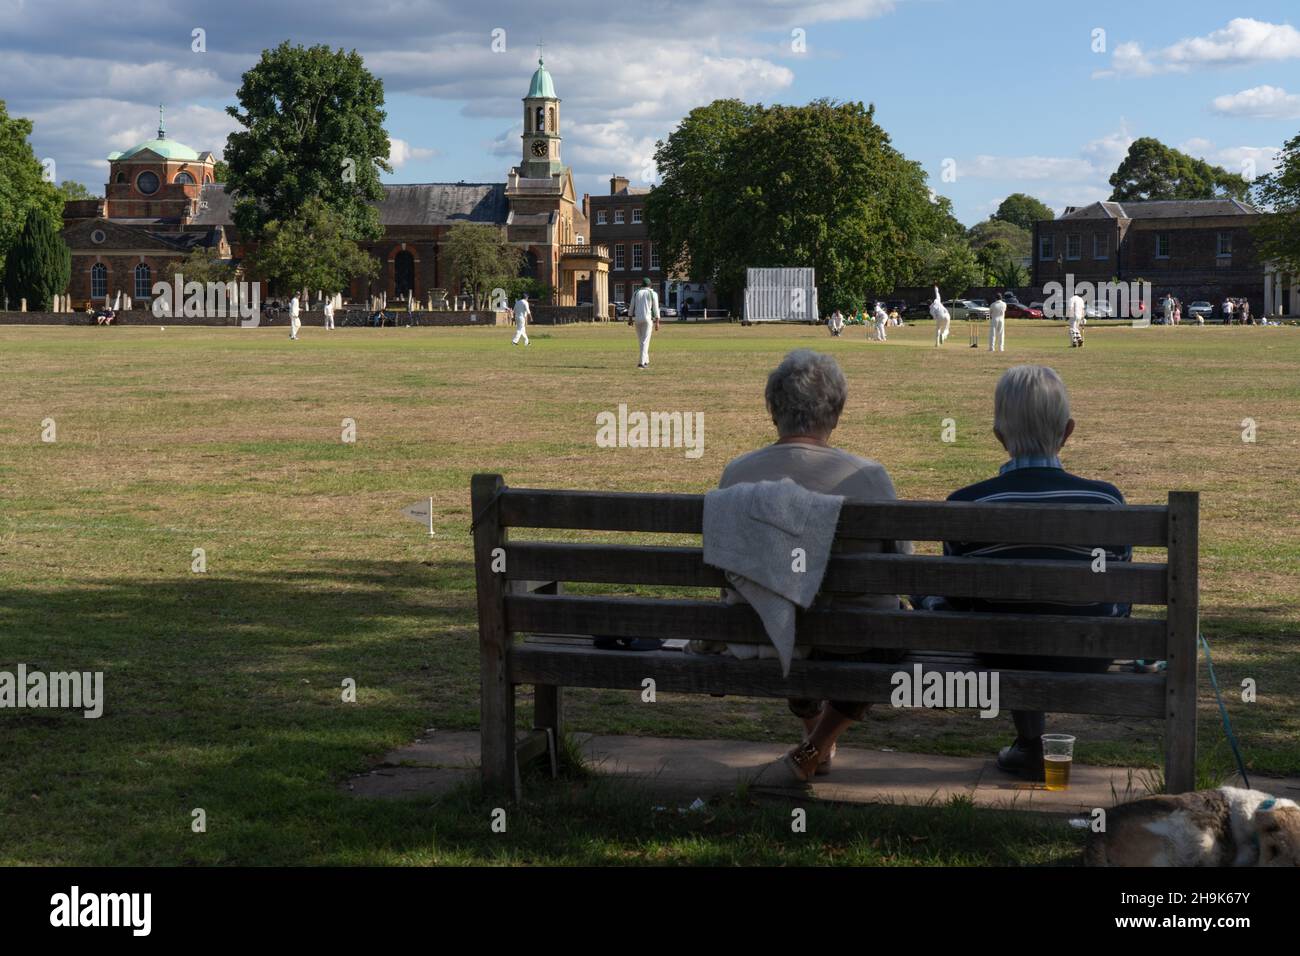 Cricket being played on Kew Green after amateur cricket was given the go-ahead to recommence as part of the lifting of coronavirus restrictions in the UK. Photo date: Saturday, July 11, 2020. Photo credit should read: Richard Gray/EMPICS Stock Photo